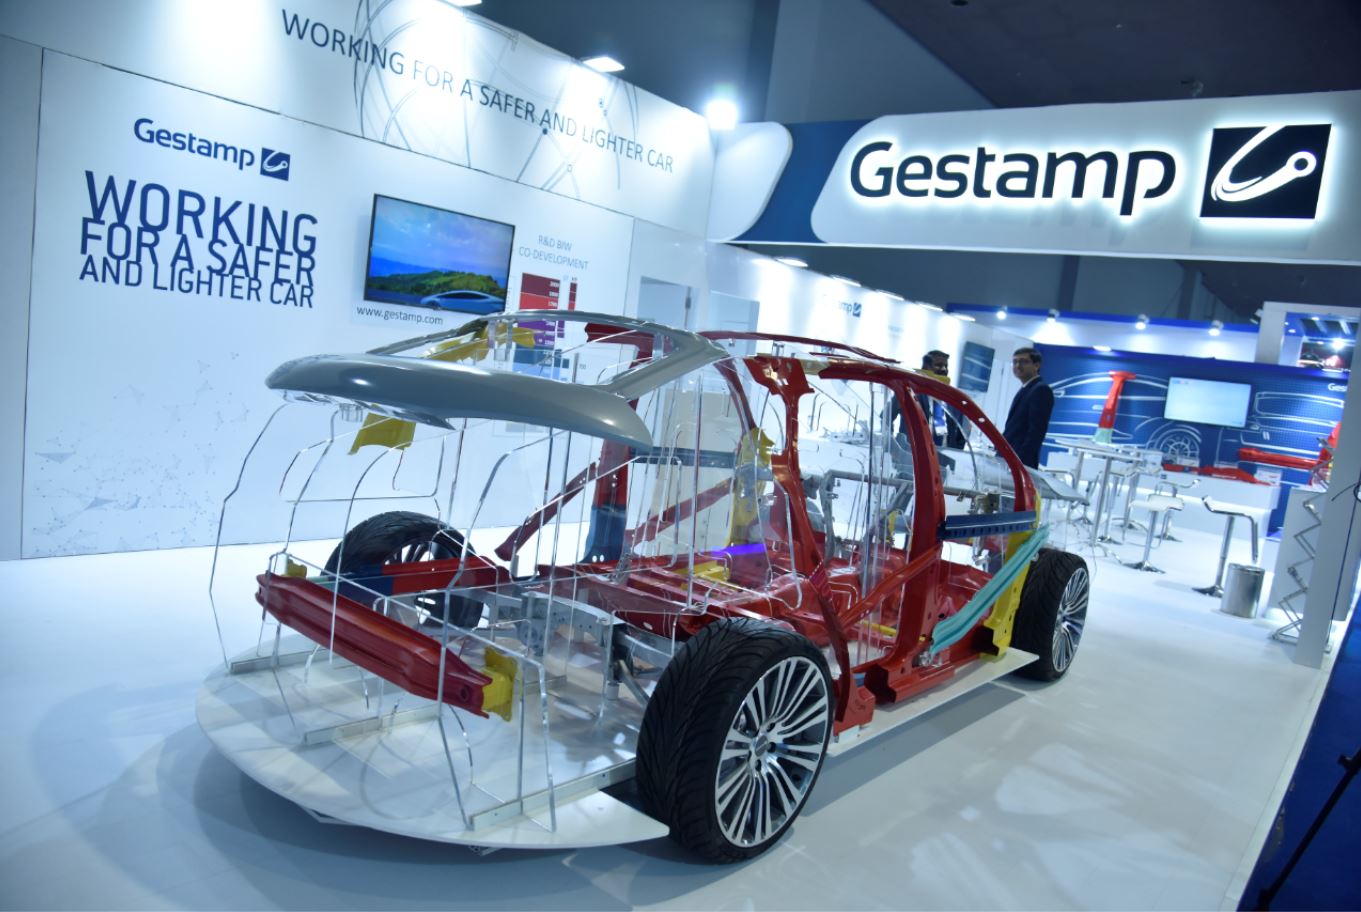 Gestamp's booth at New Delhi Auto Expo Components 